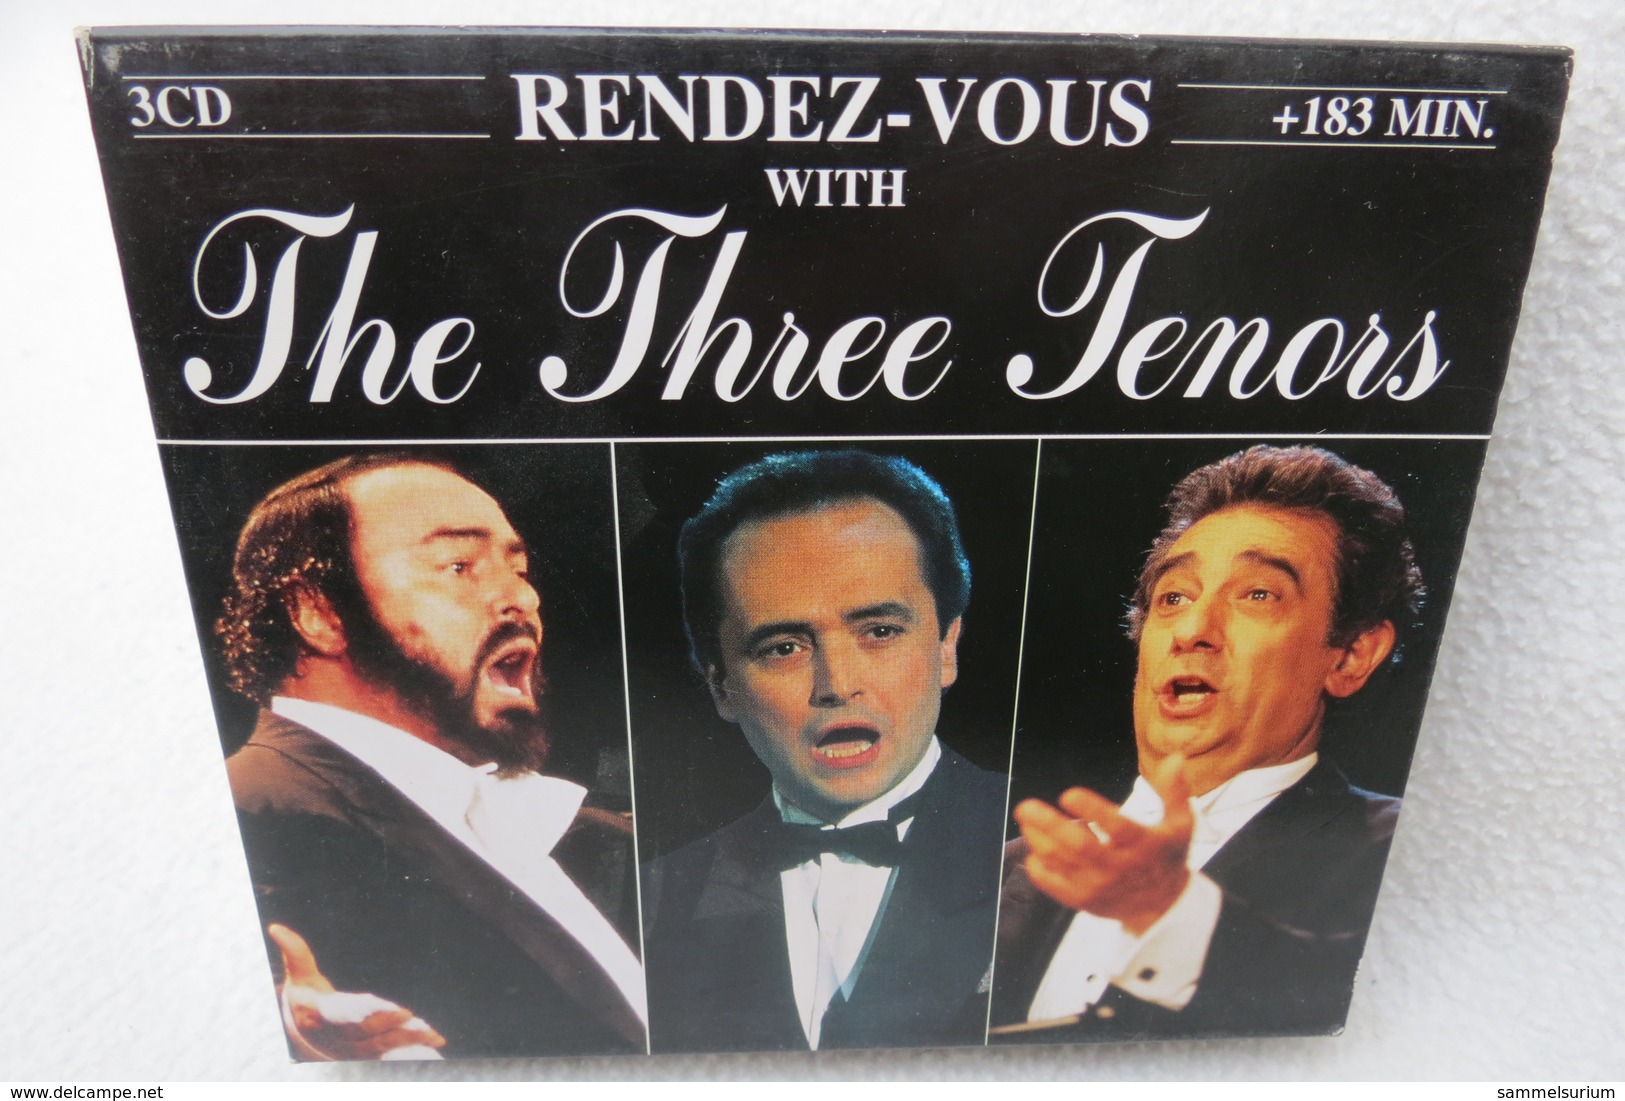 3 CD-Box "The Three Tenors" Rendez-Vous - Opere